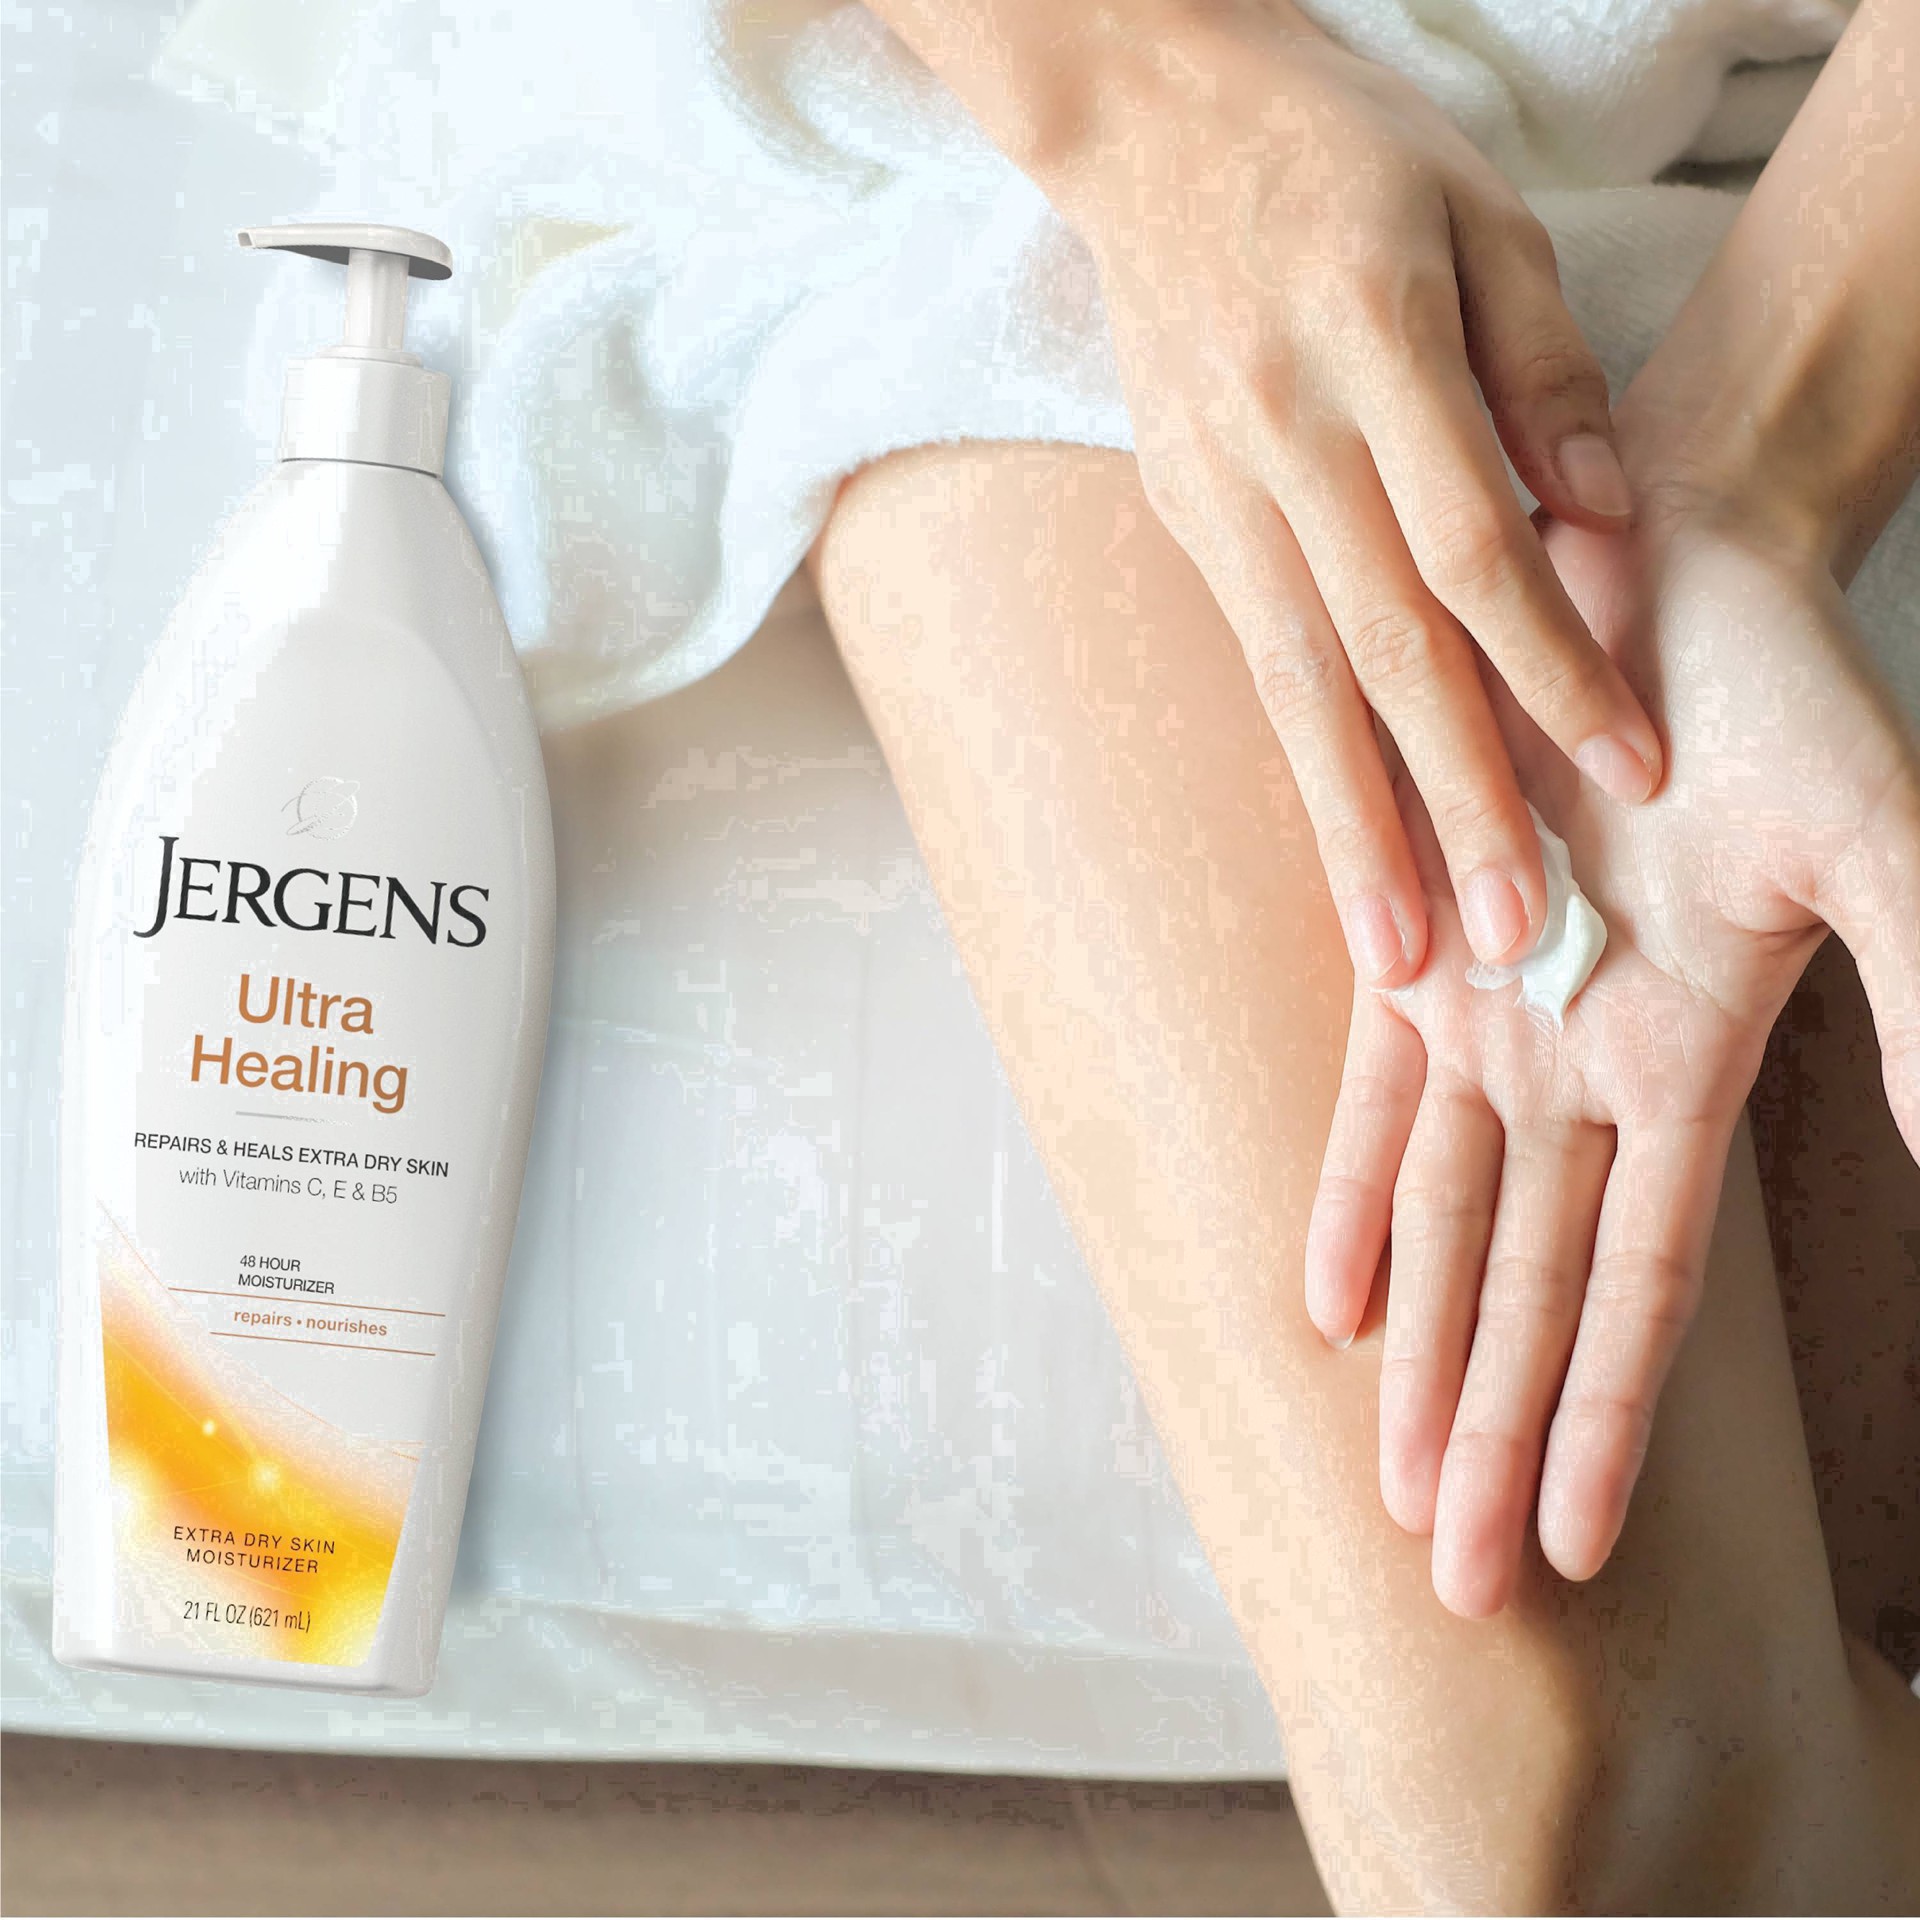 slide 53 of 67, Jergens Hand and Body Lotion, Dry Skin Moisturizer with Vitamins C,E, and B5, 21 fl oz